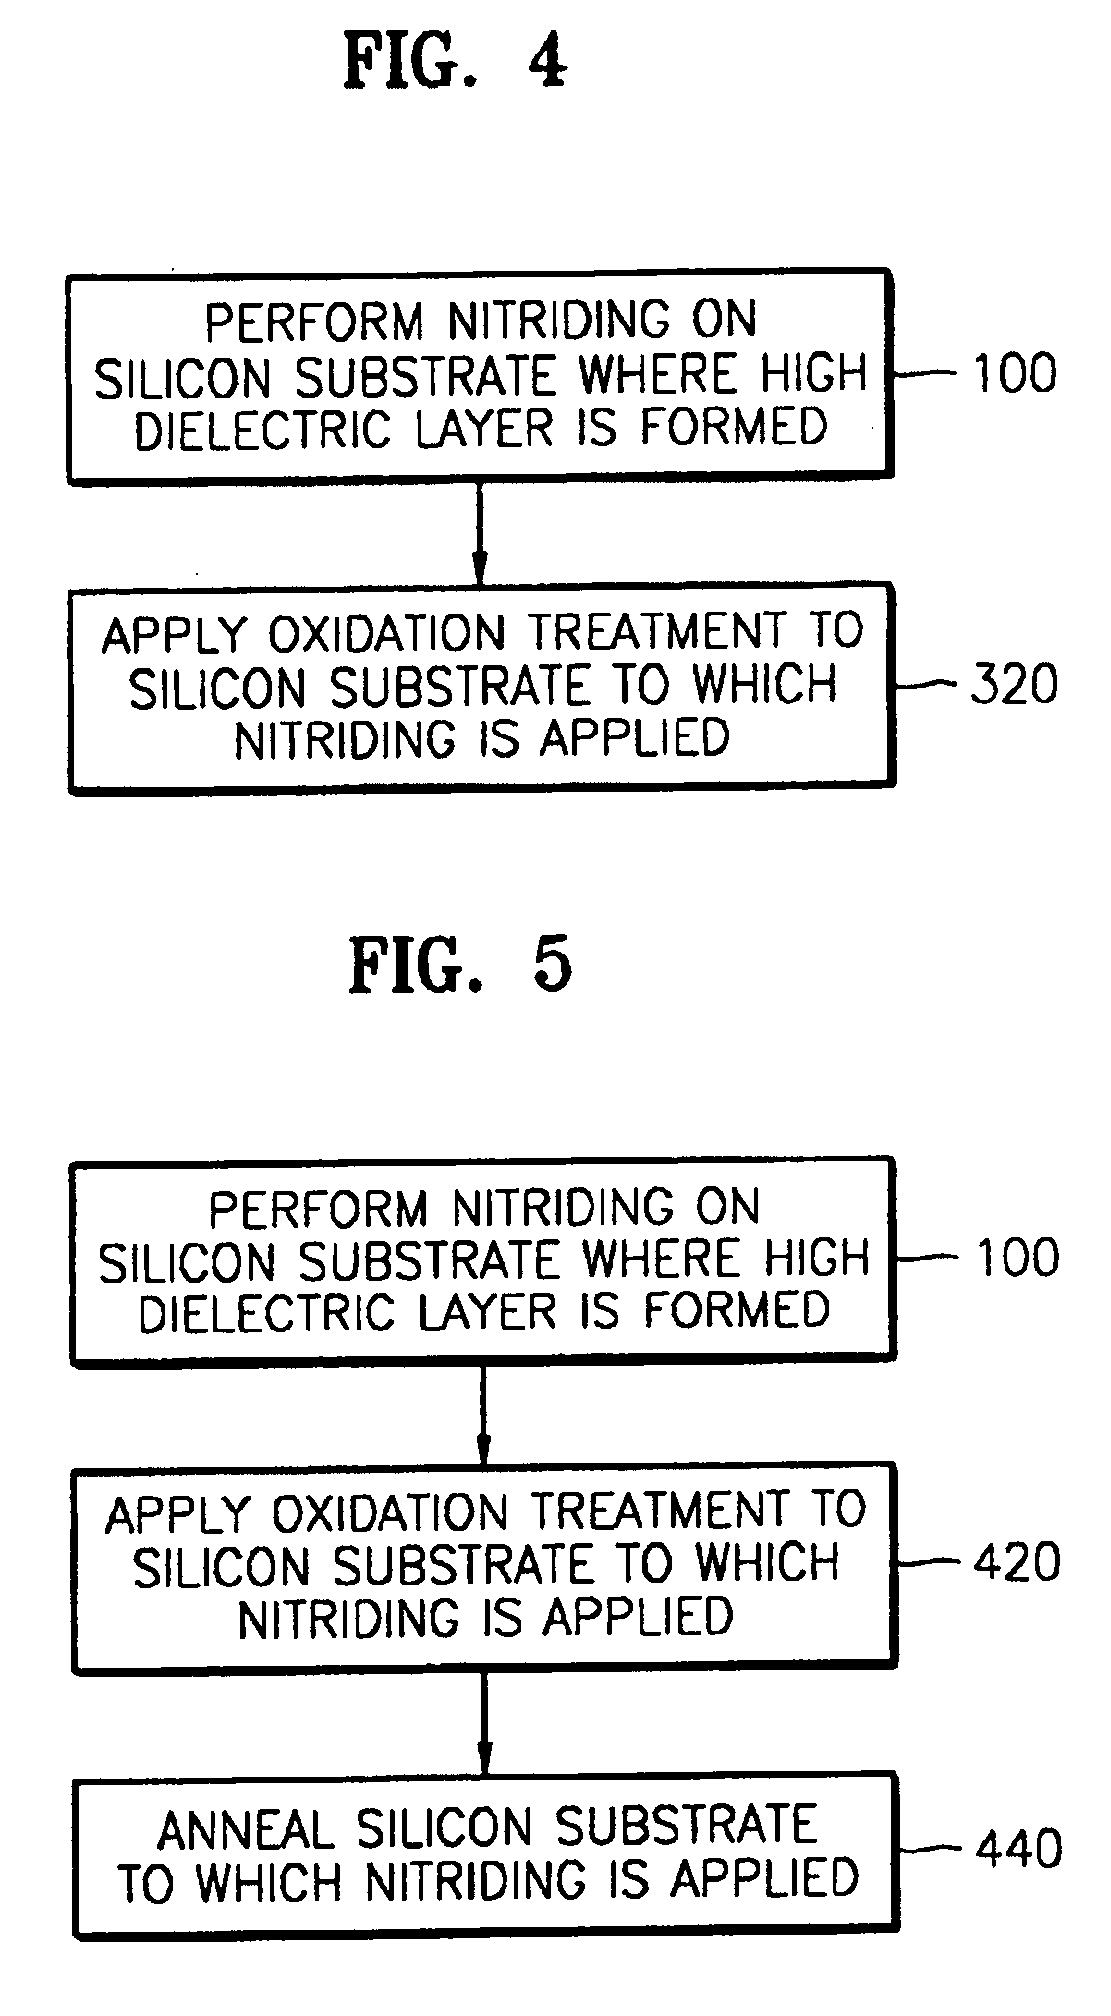 Post thermal treatment methods of forming high dielectric layers in integrated circuit devices